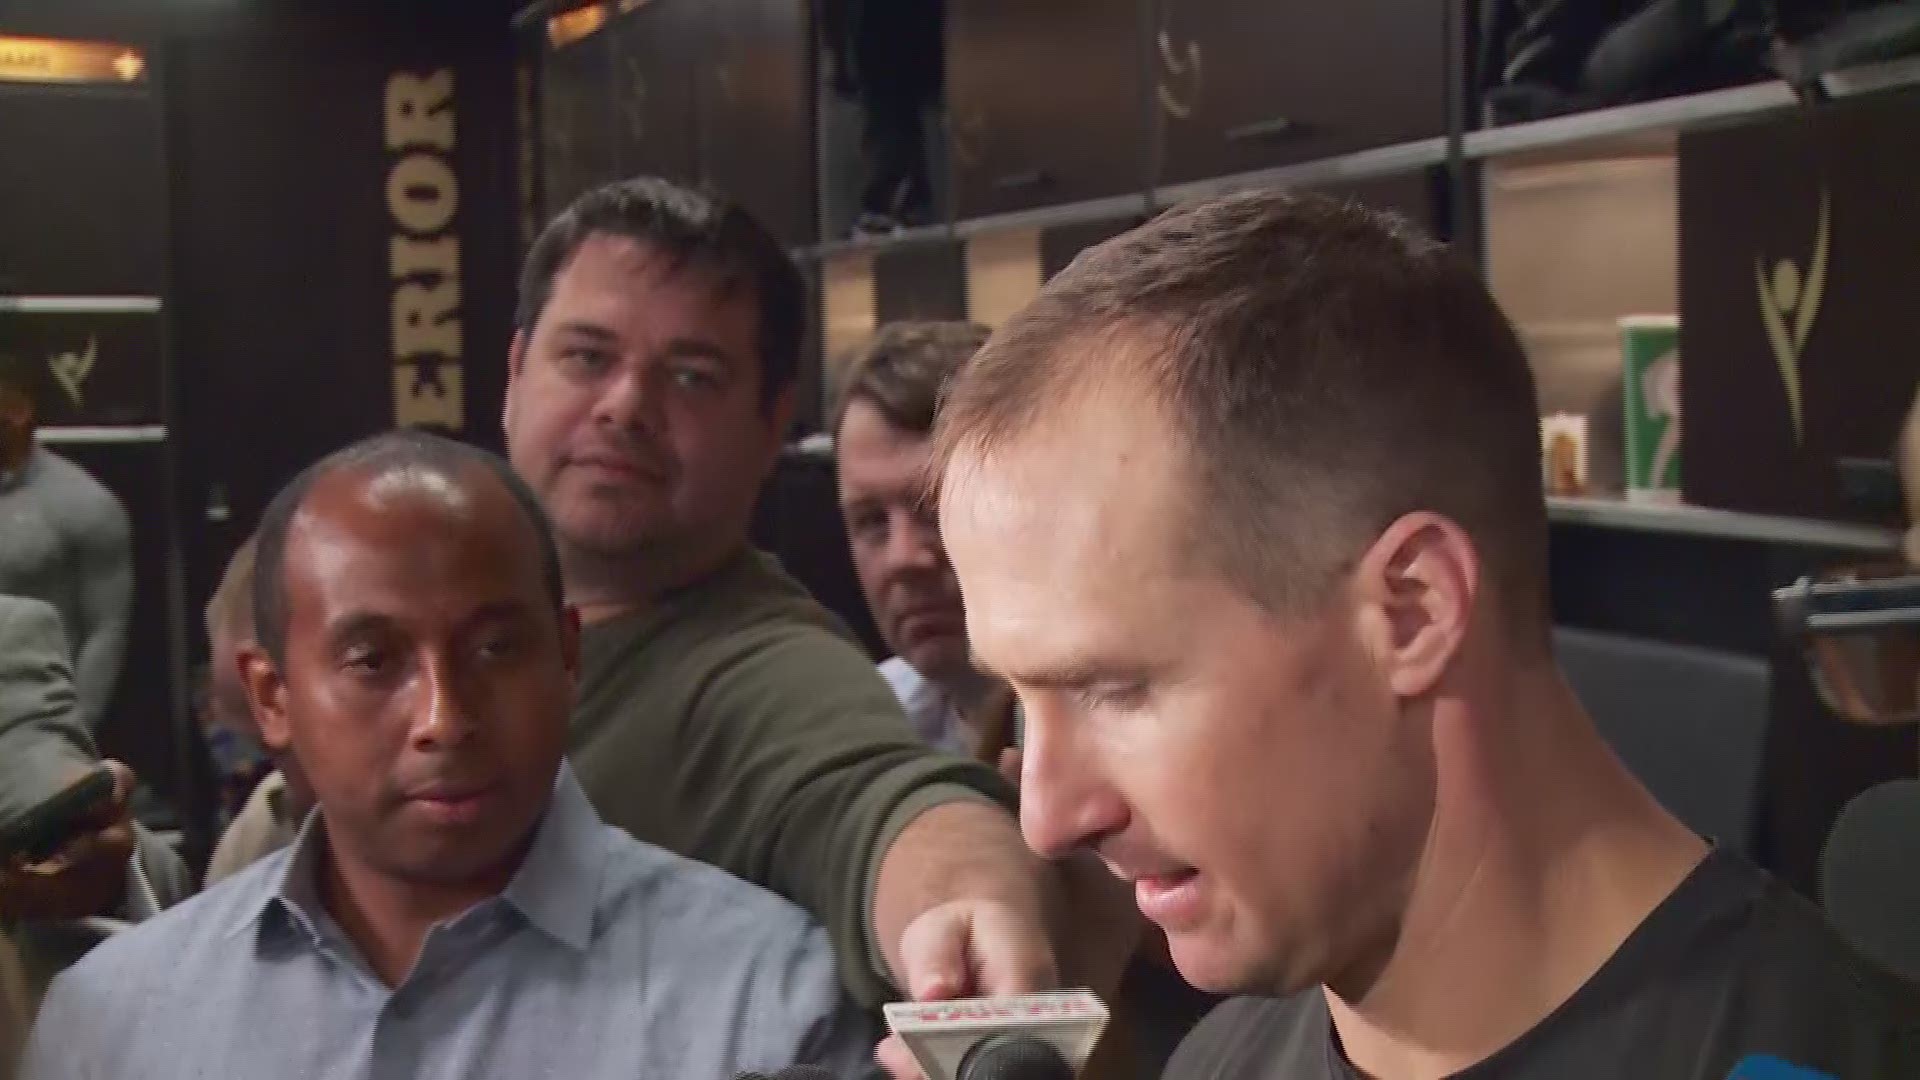 Brees said he plans to play, even though he says his thumb won't be fully healed for three months.